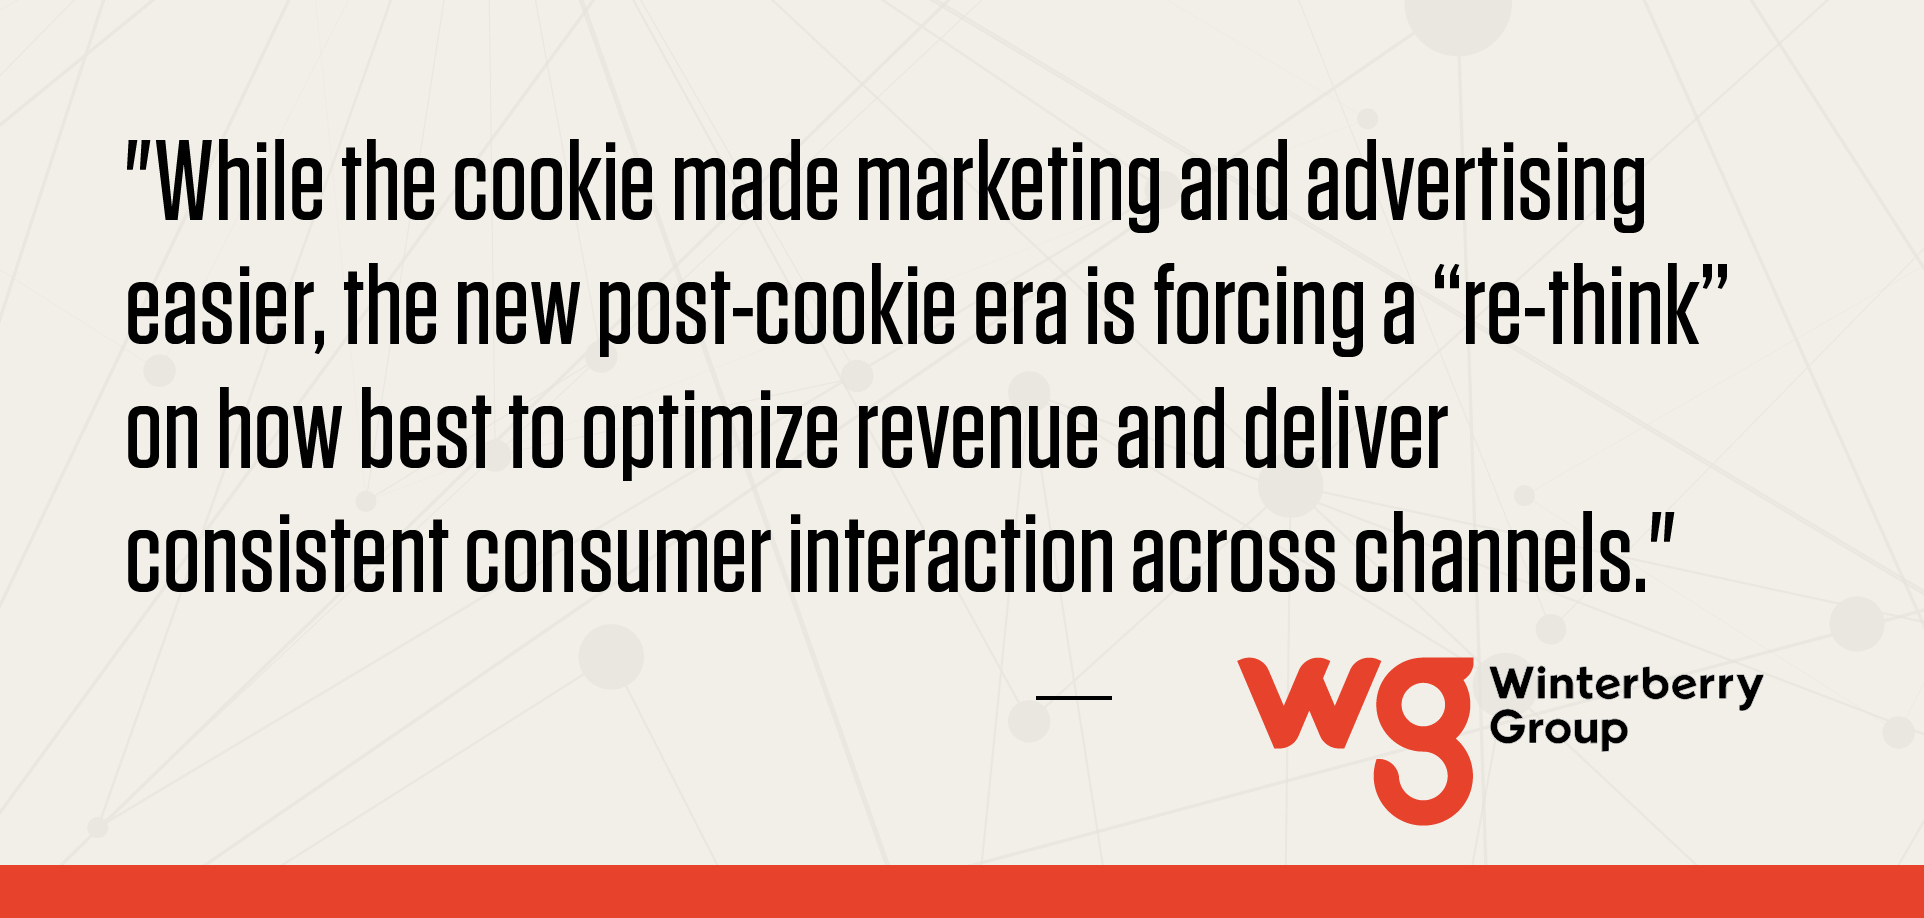 "While the cookie made marketing and advertising easier, the new post-cookie era is forcing a “re-think” on how best to optimize revenue and deliver consistent consumer interaction across channels."